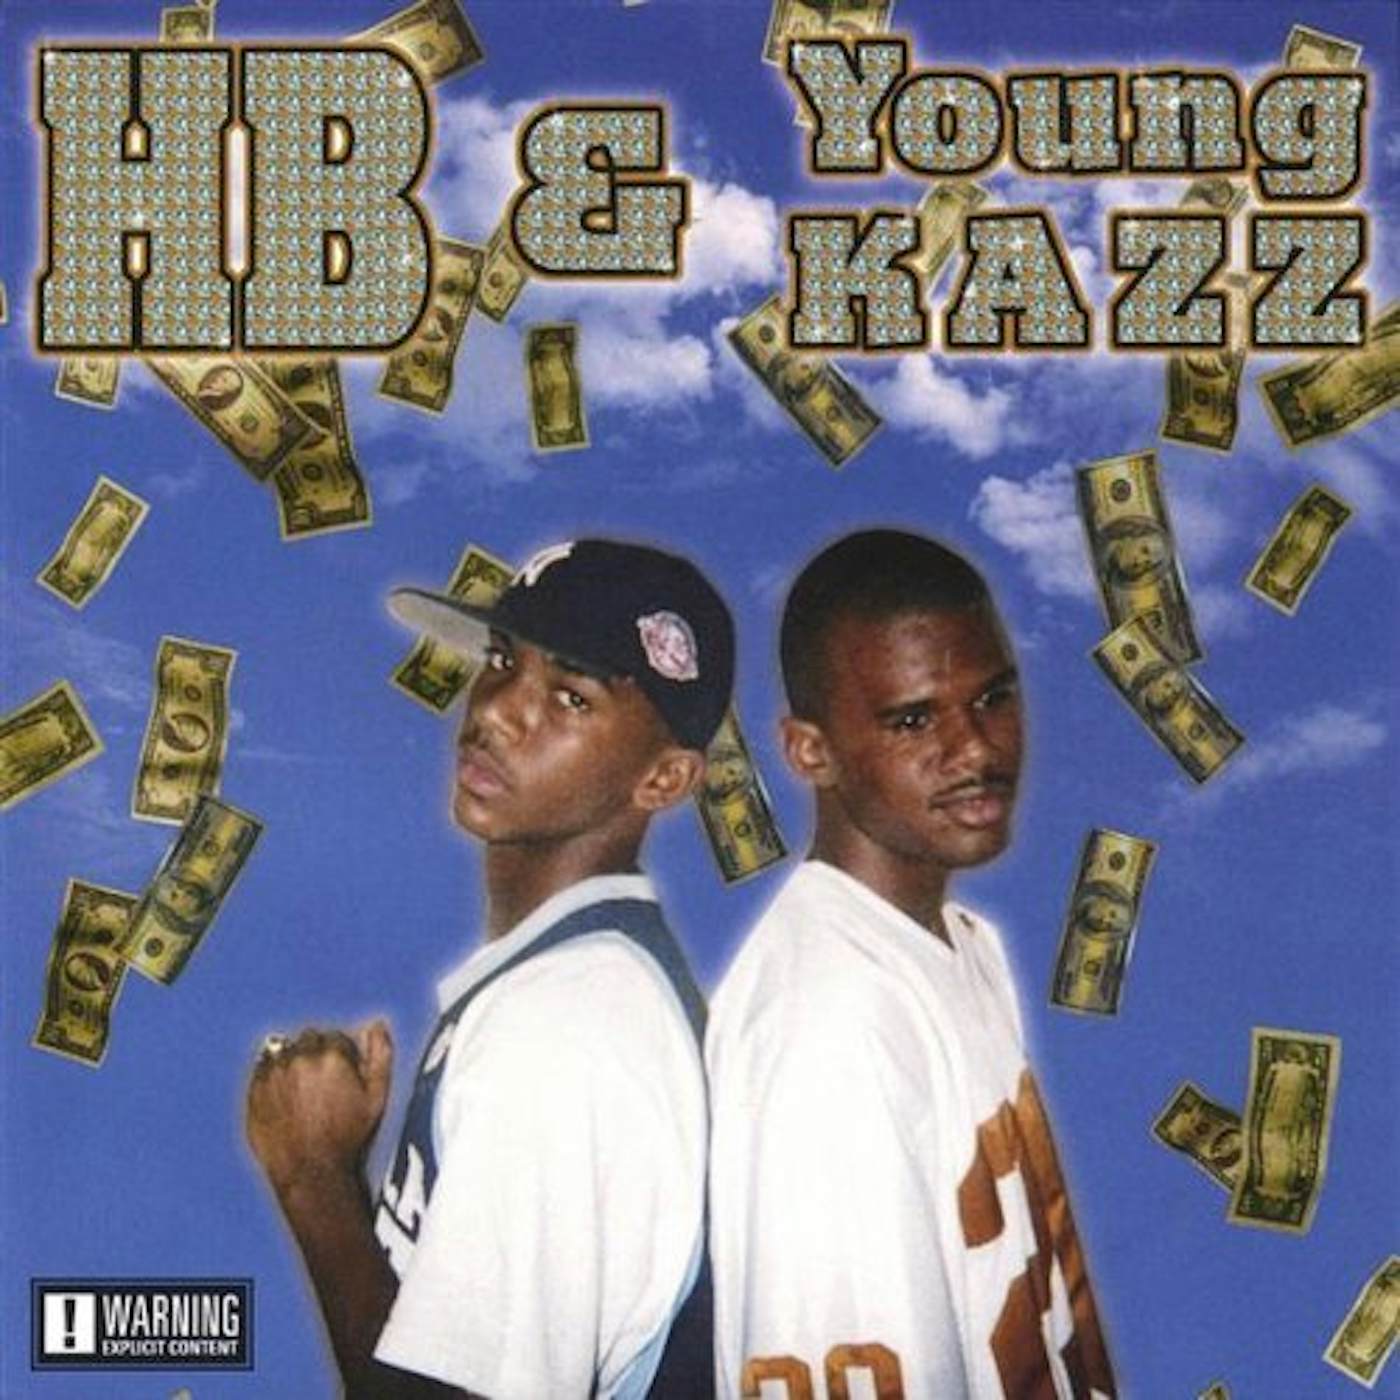 HB & YOUNG KAZZ CD